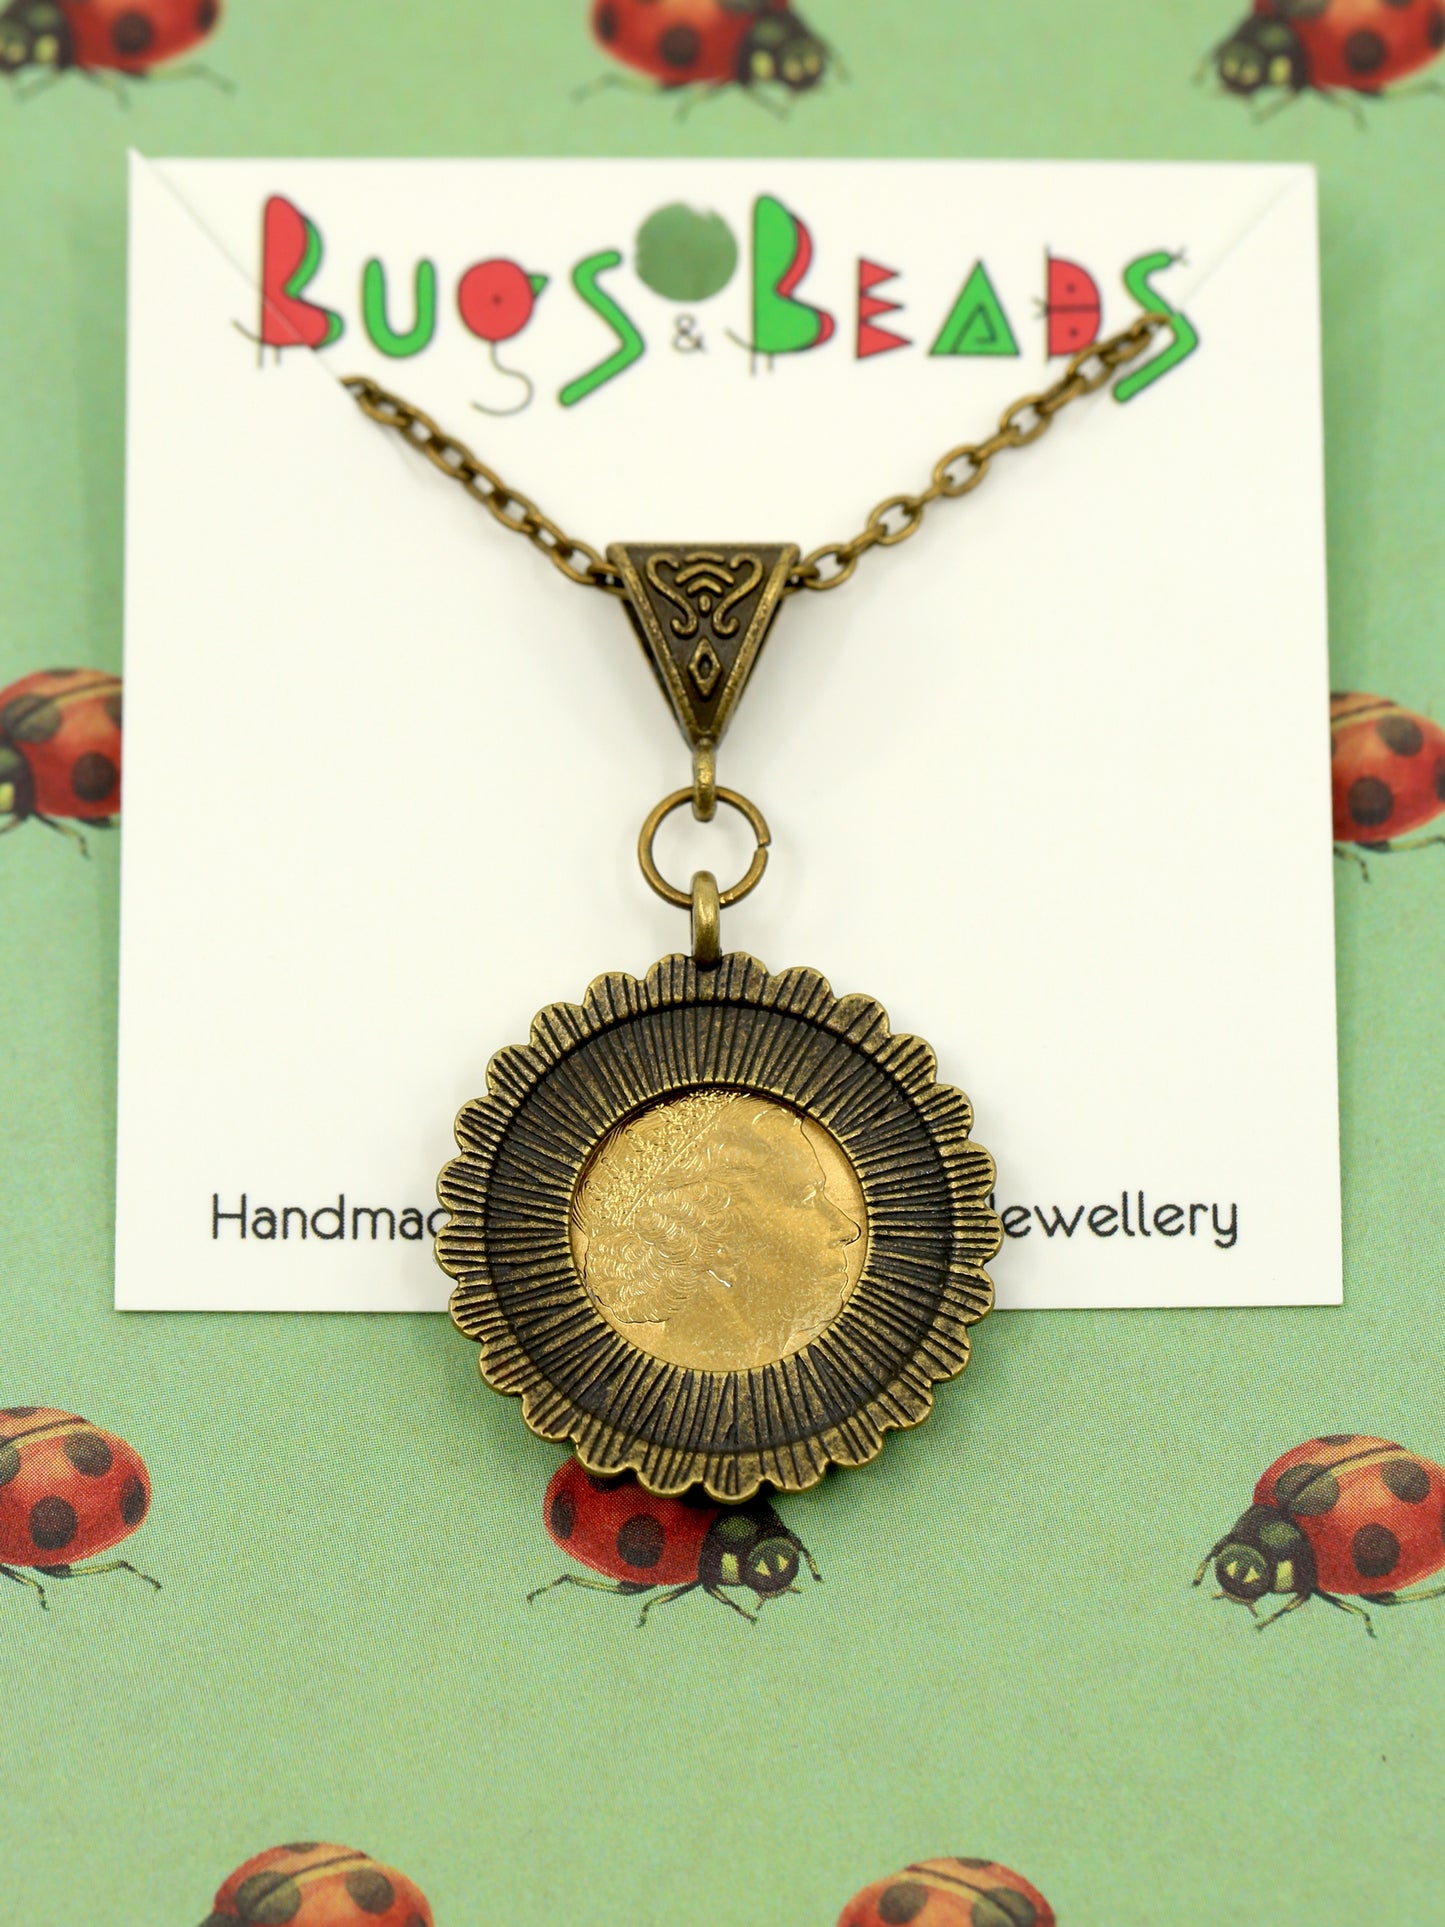 Rainbow stag beetle decimal coin necklace